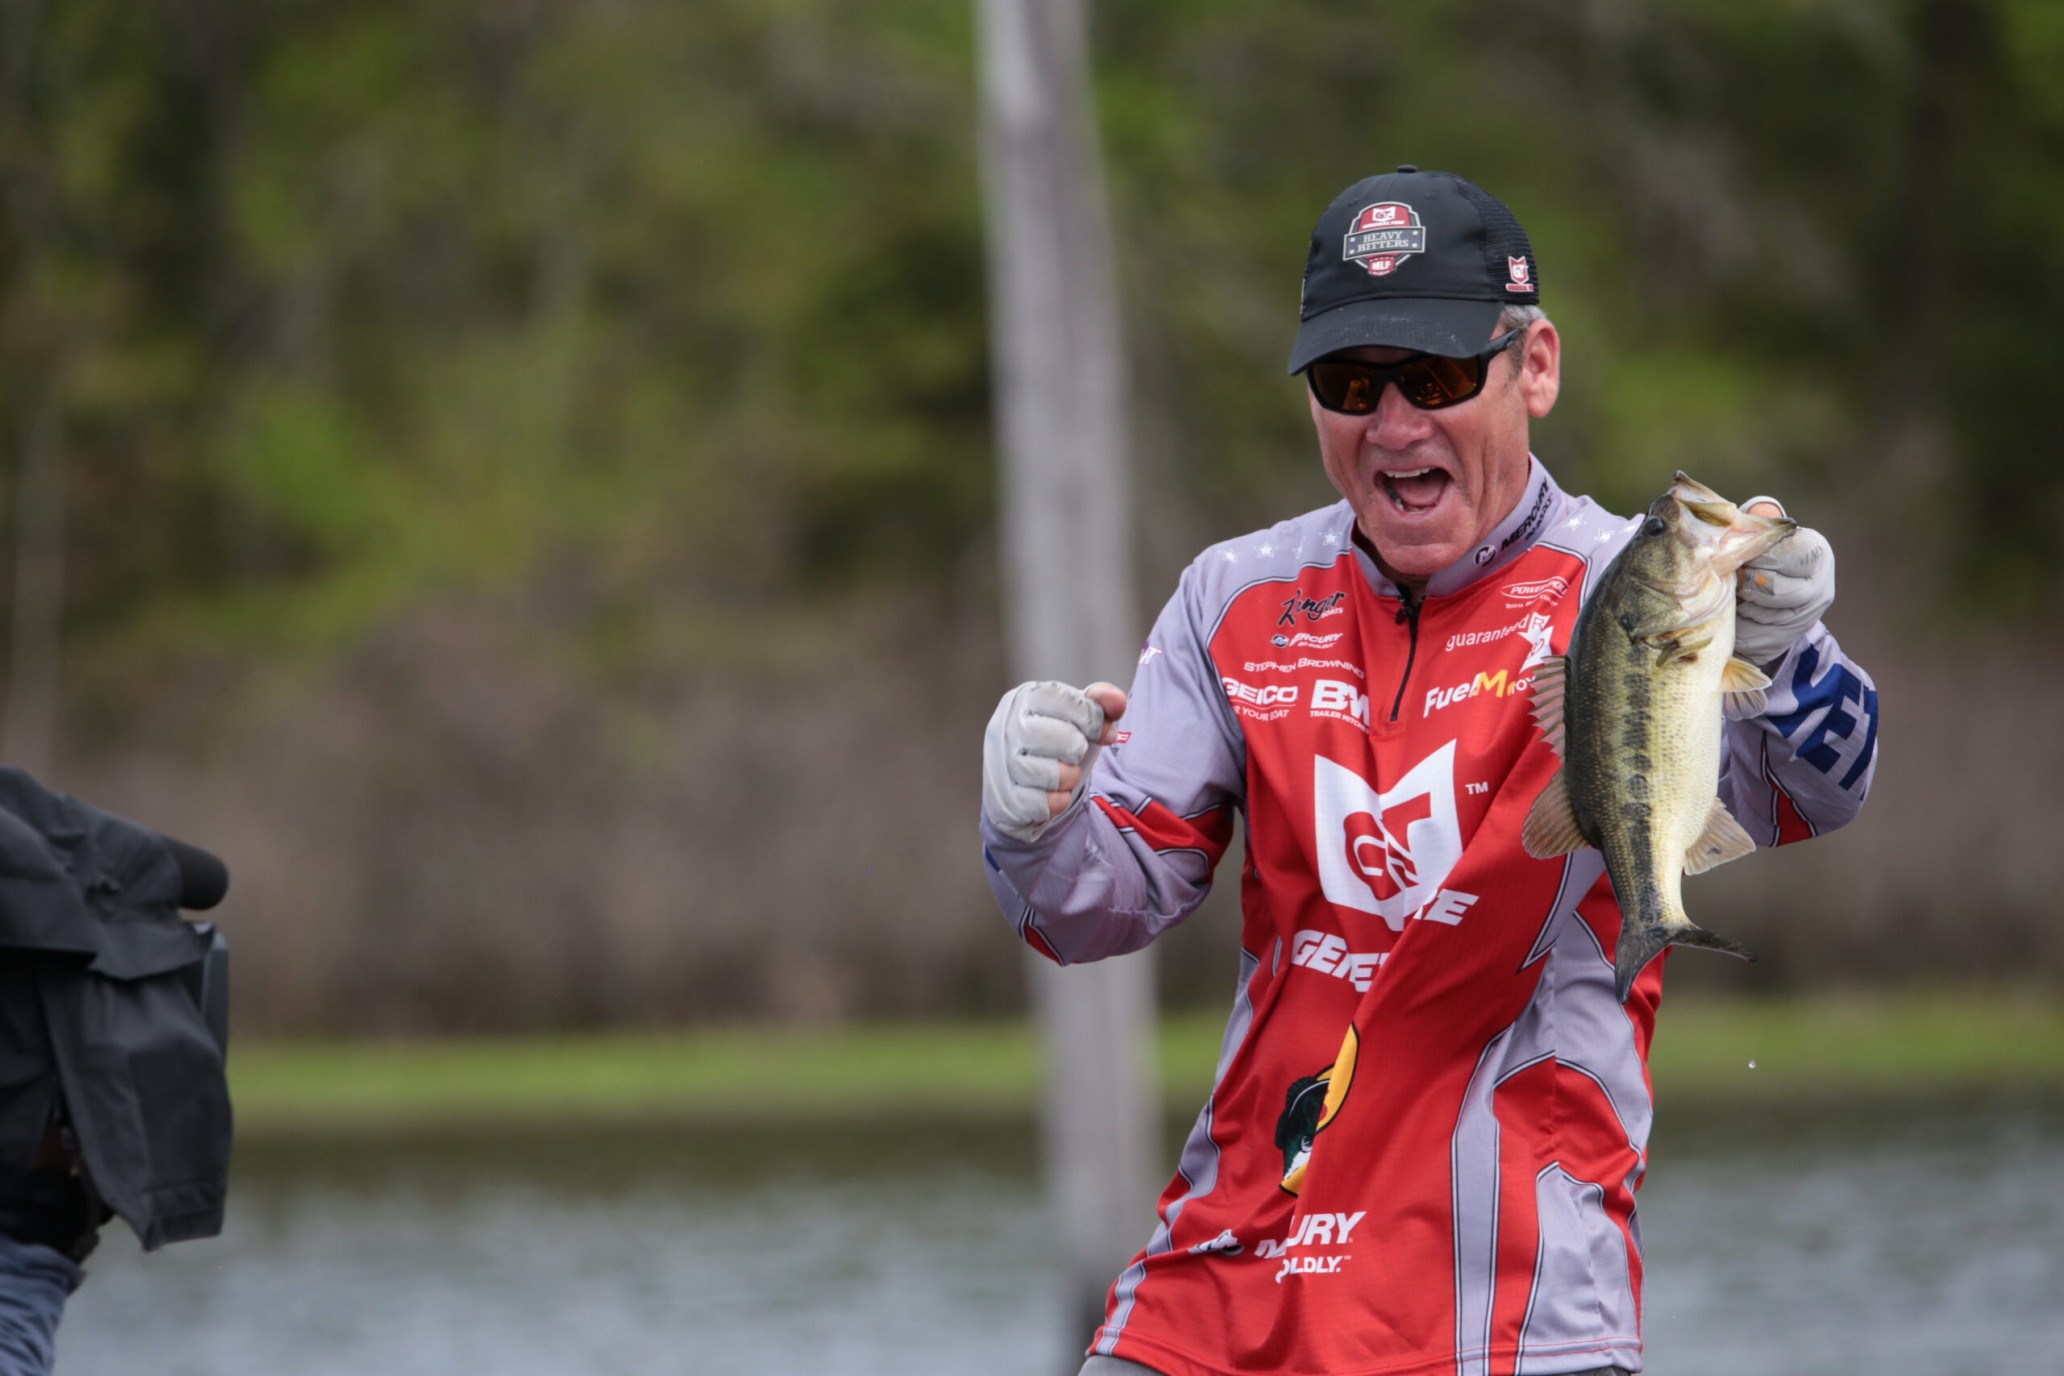 Major League Fishing - Don't forget to send us your questions! The MLF NOW!  broadcast team will be answering them during the live coverage, which  starts at 10 a.m. CT. Just use #